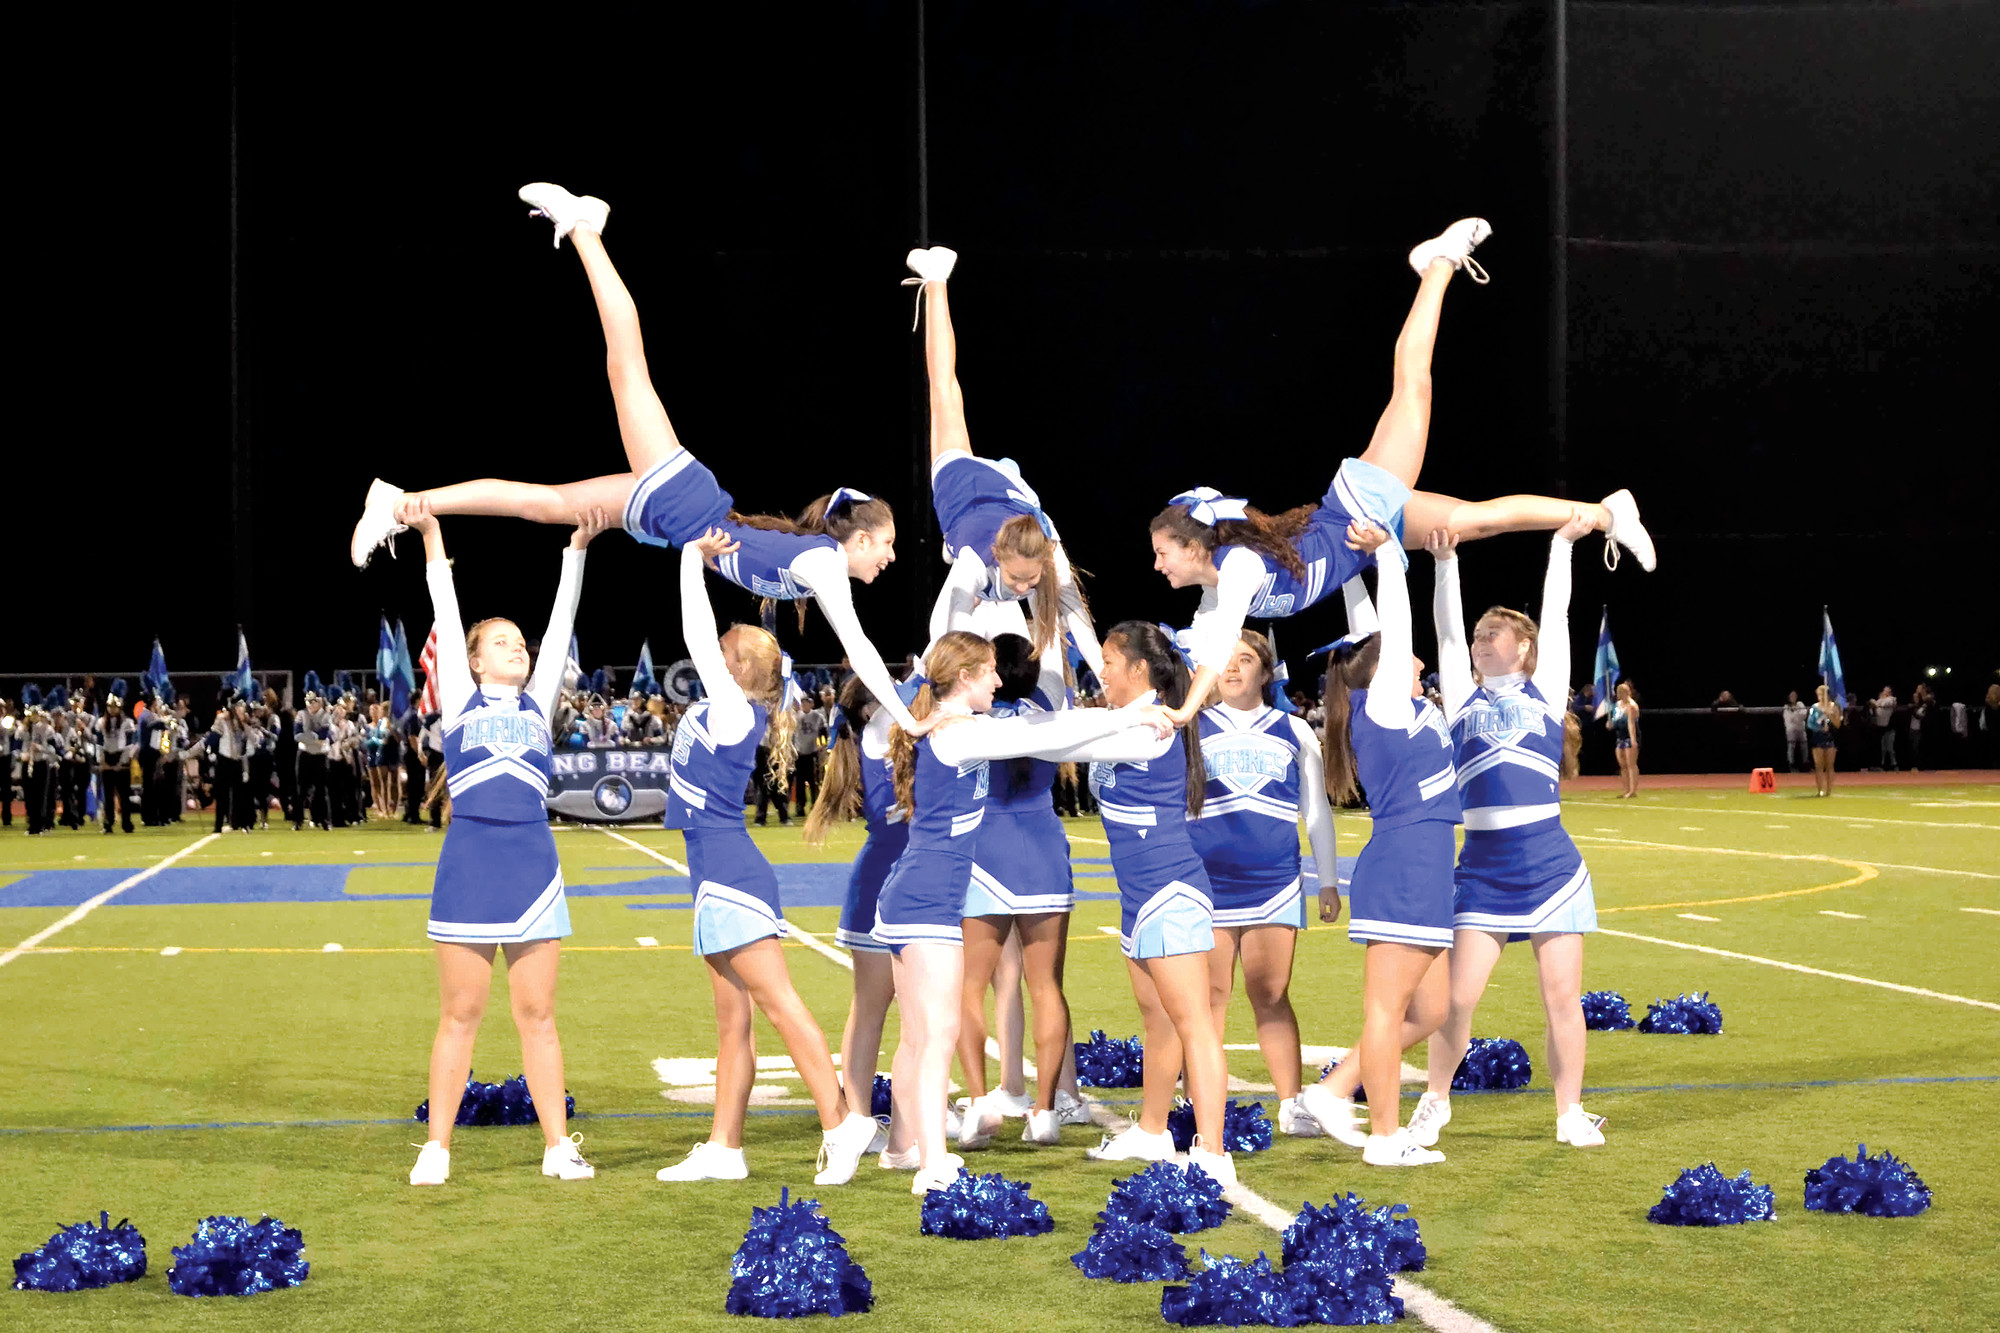 The cheerleaders were also featured in the halftime show festivities.